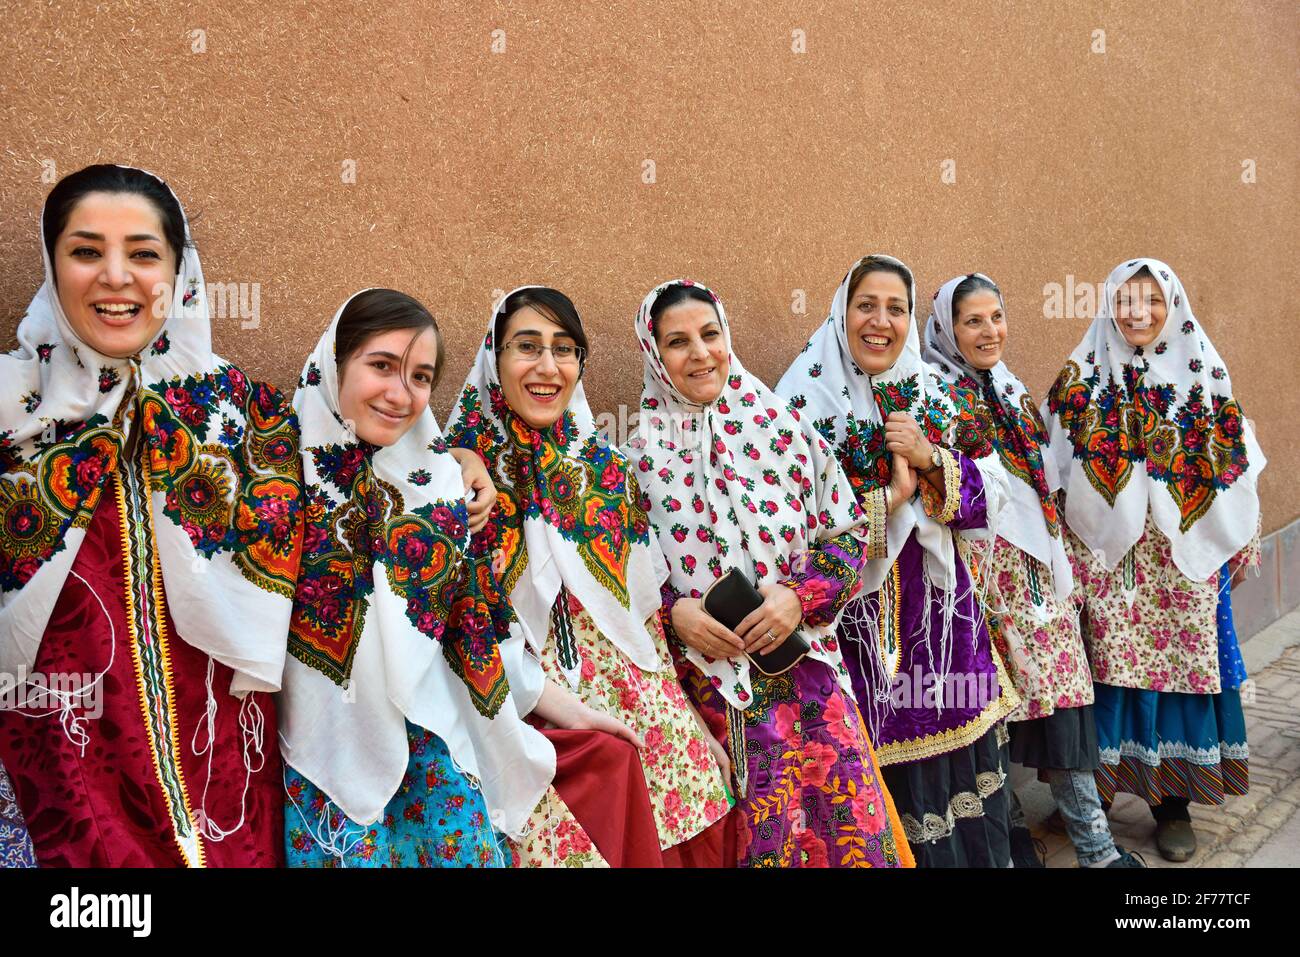 Iran, Isfahan province, Abyaneh, Cheerful visitors wearing the traditional village dress Stock Photo